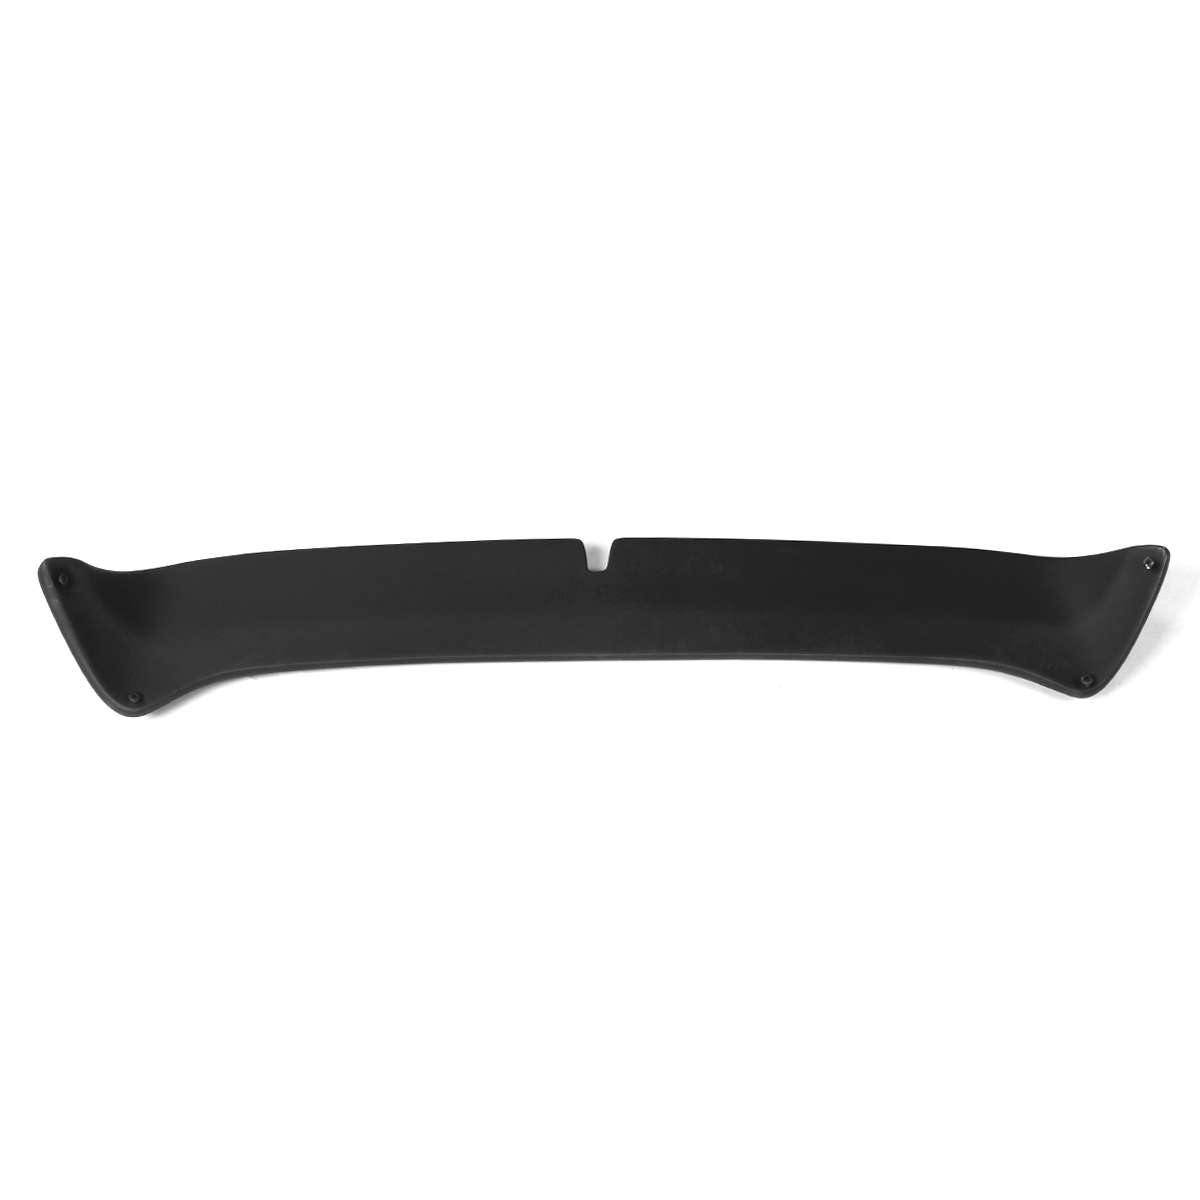 ABS Unpainted Black Car Rear Roof Spoiler Wing Lip for VW Golf MK4 IV